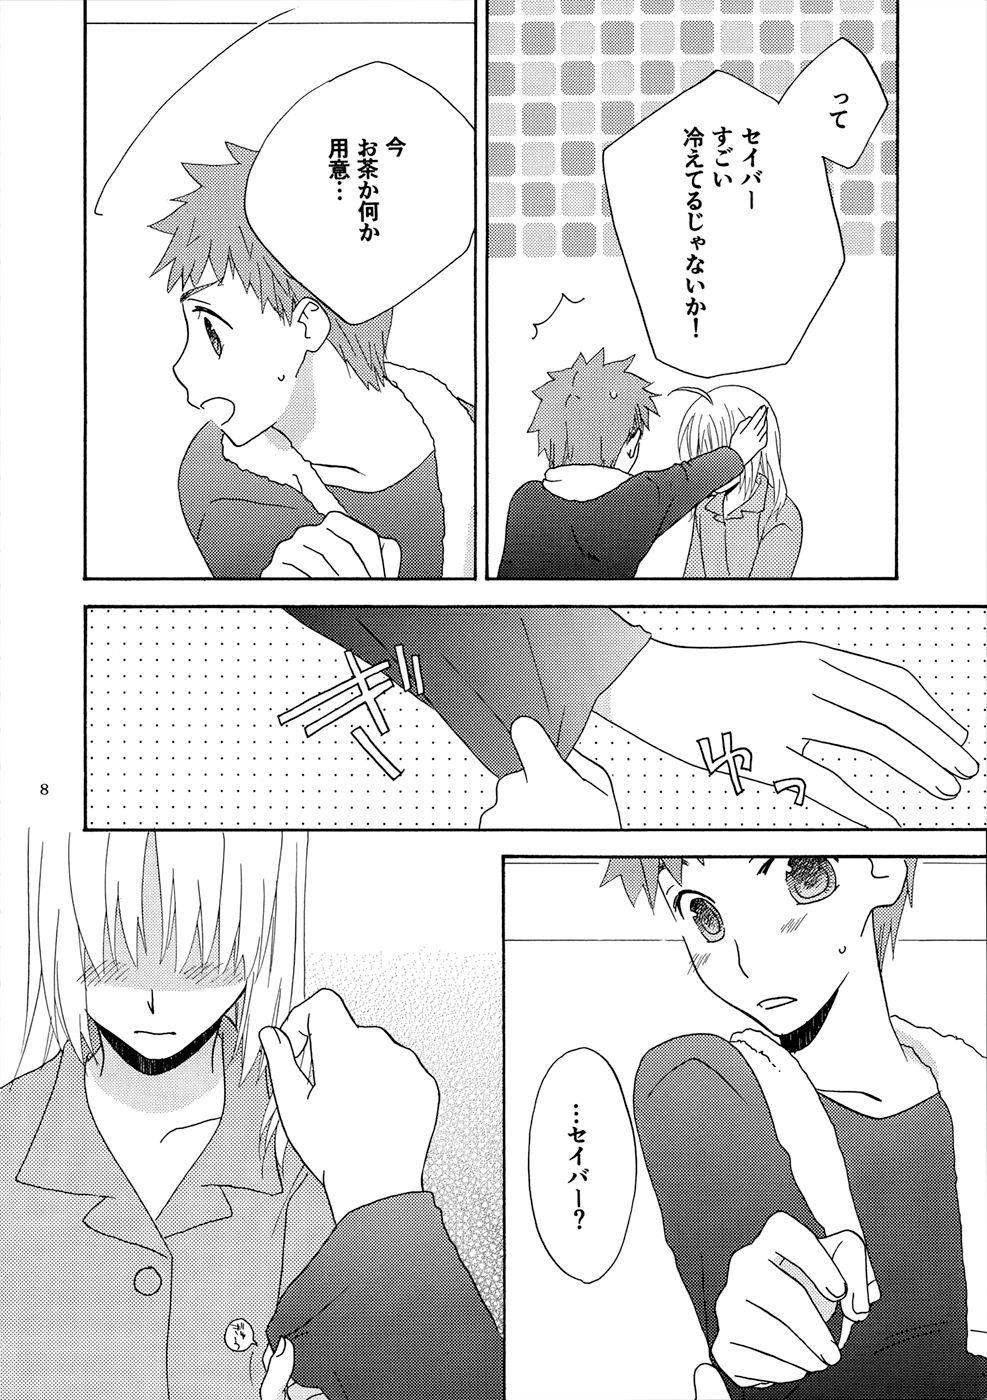 Fingers POP STAR - Fate stay night Realsex - Page 7